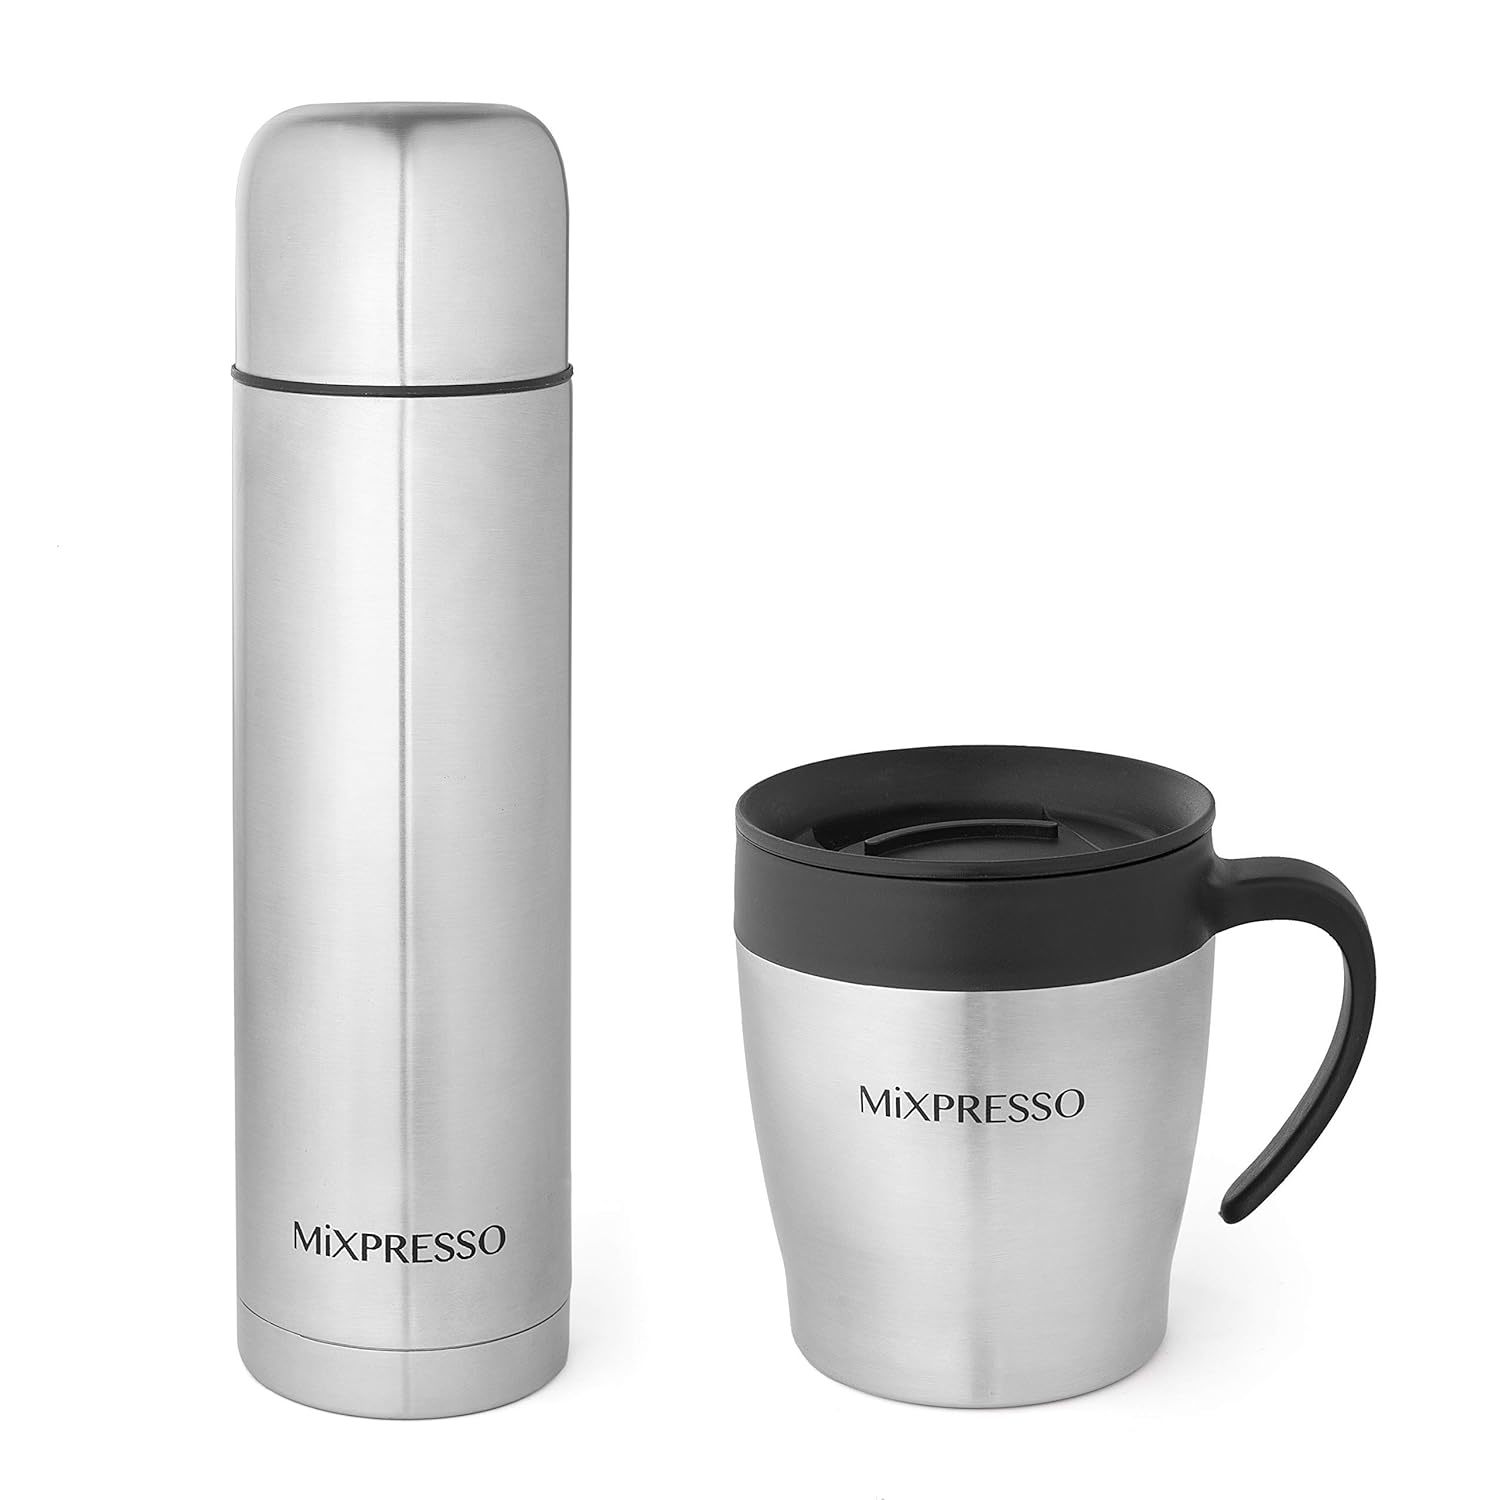 Primary image for Mixpresso Coffee Flask +Coffee Mug, Stainless Steel Coffee vacuum flask For Hot 